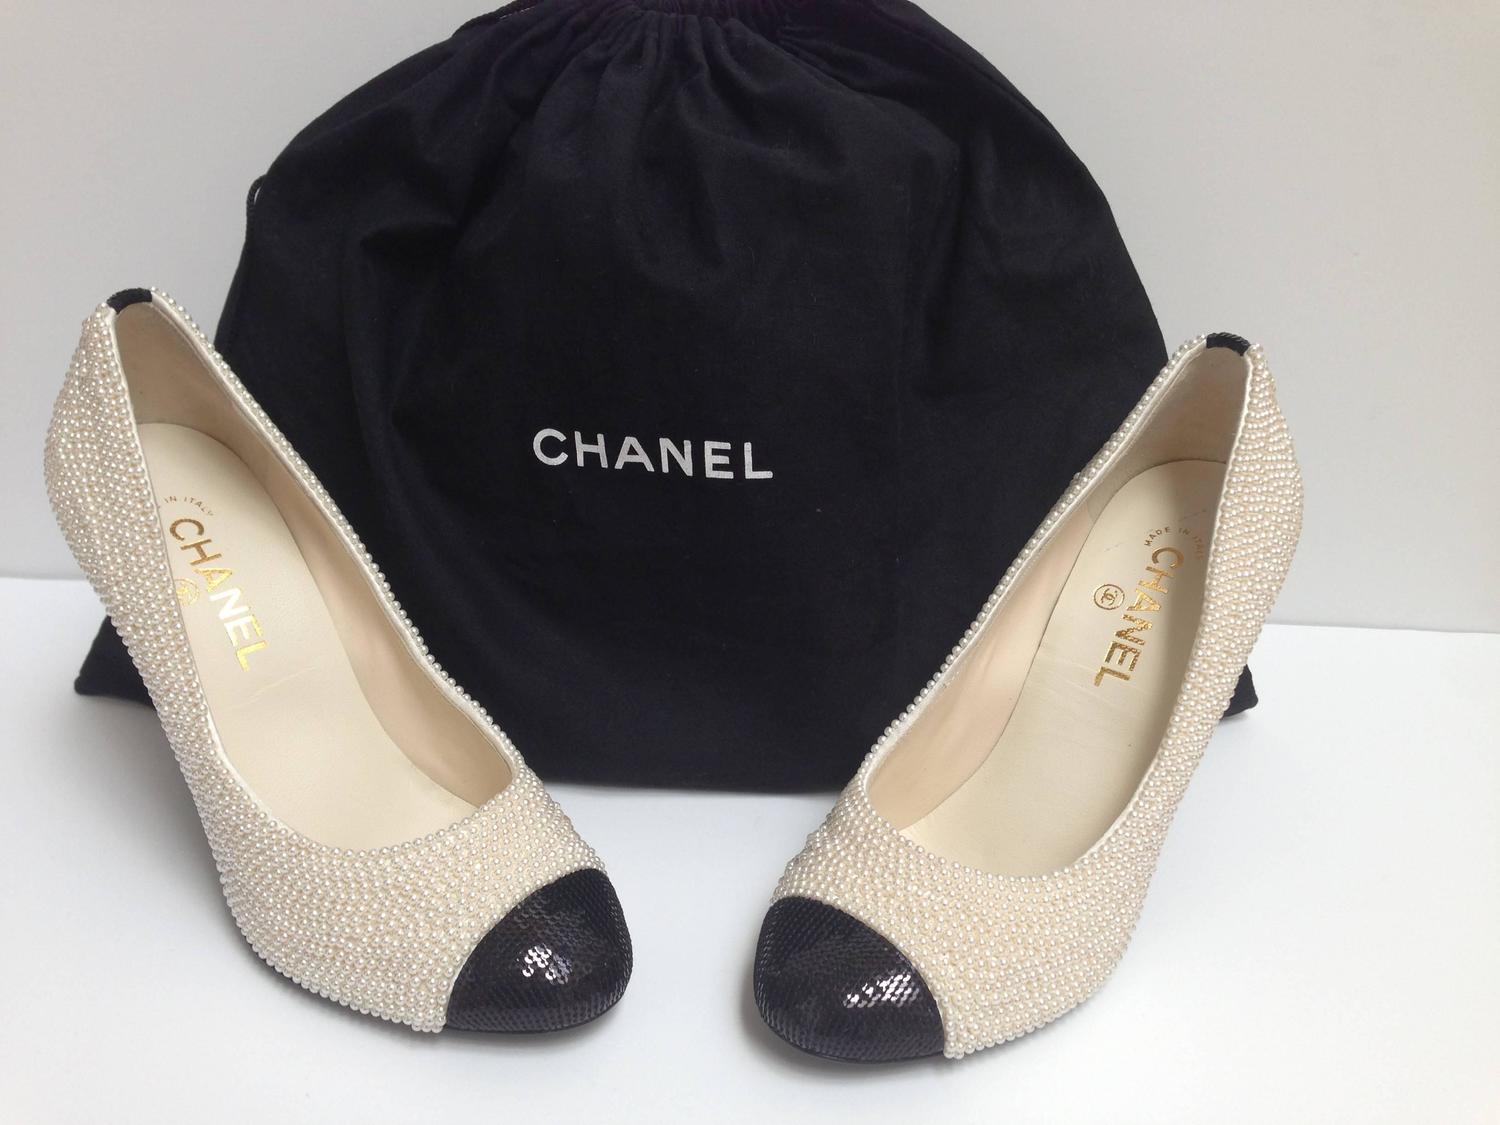 CHANEL Pearl Encrusted Spectator Pumps Cap Toe Shoes Size 40 at 1stdibs